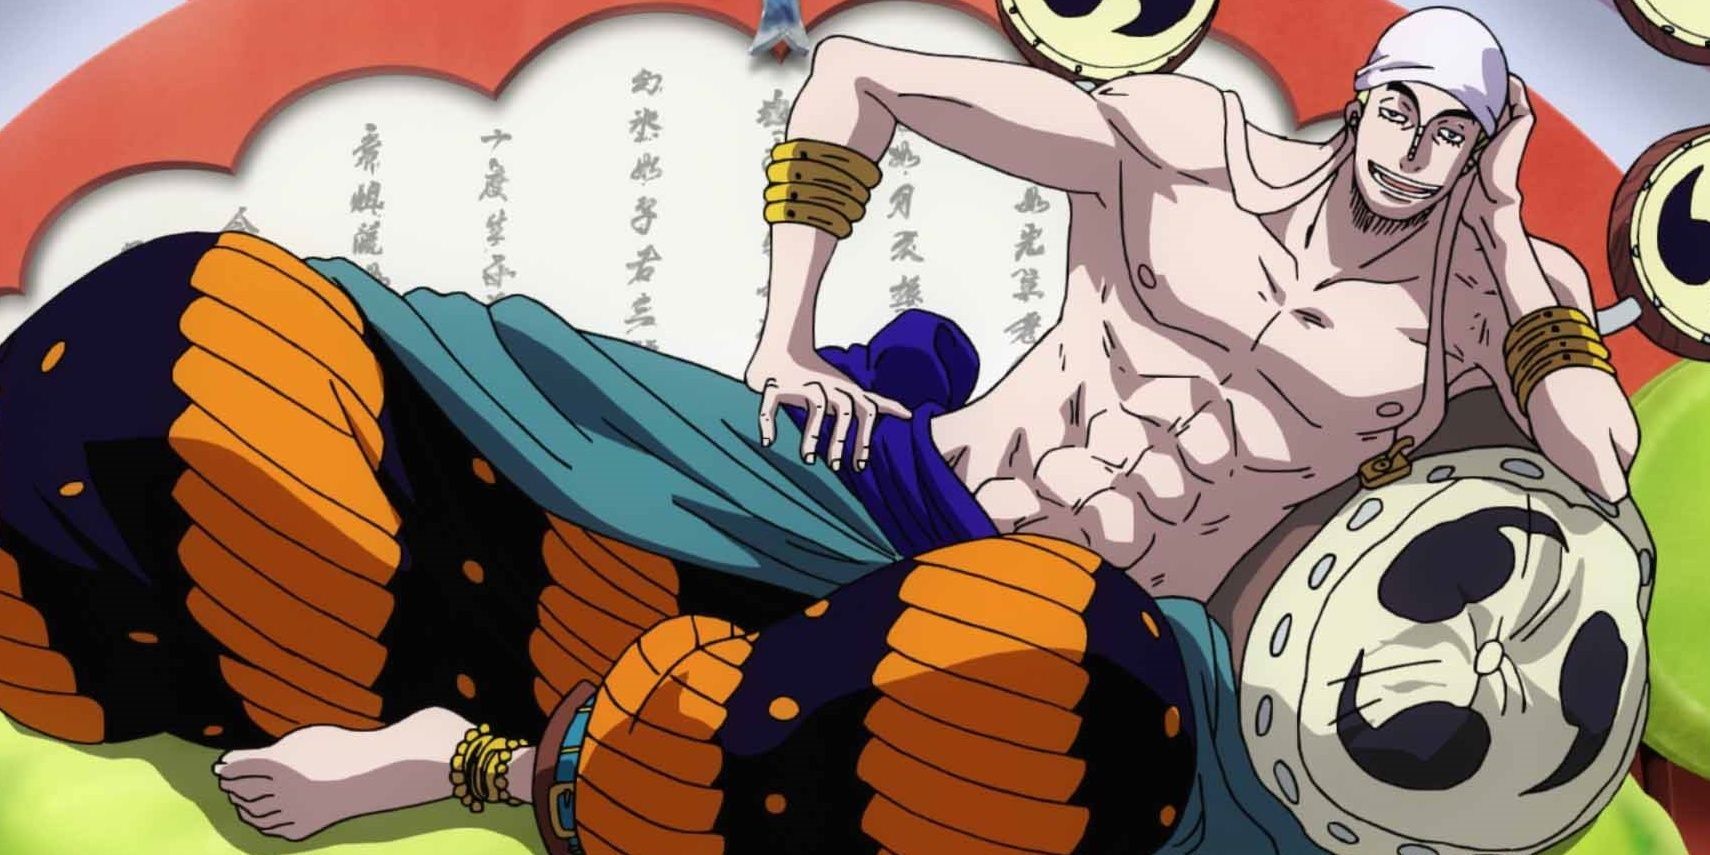 Enel from One Piece lounges on a pillow